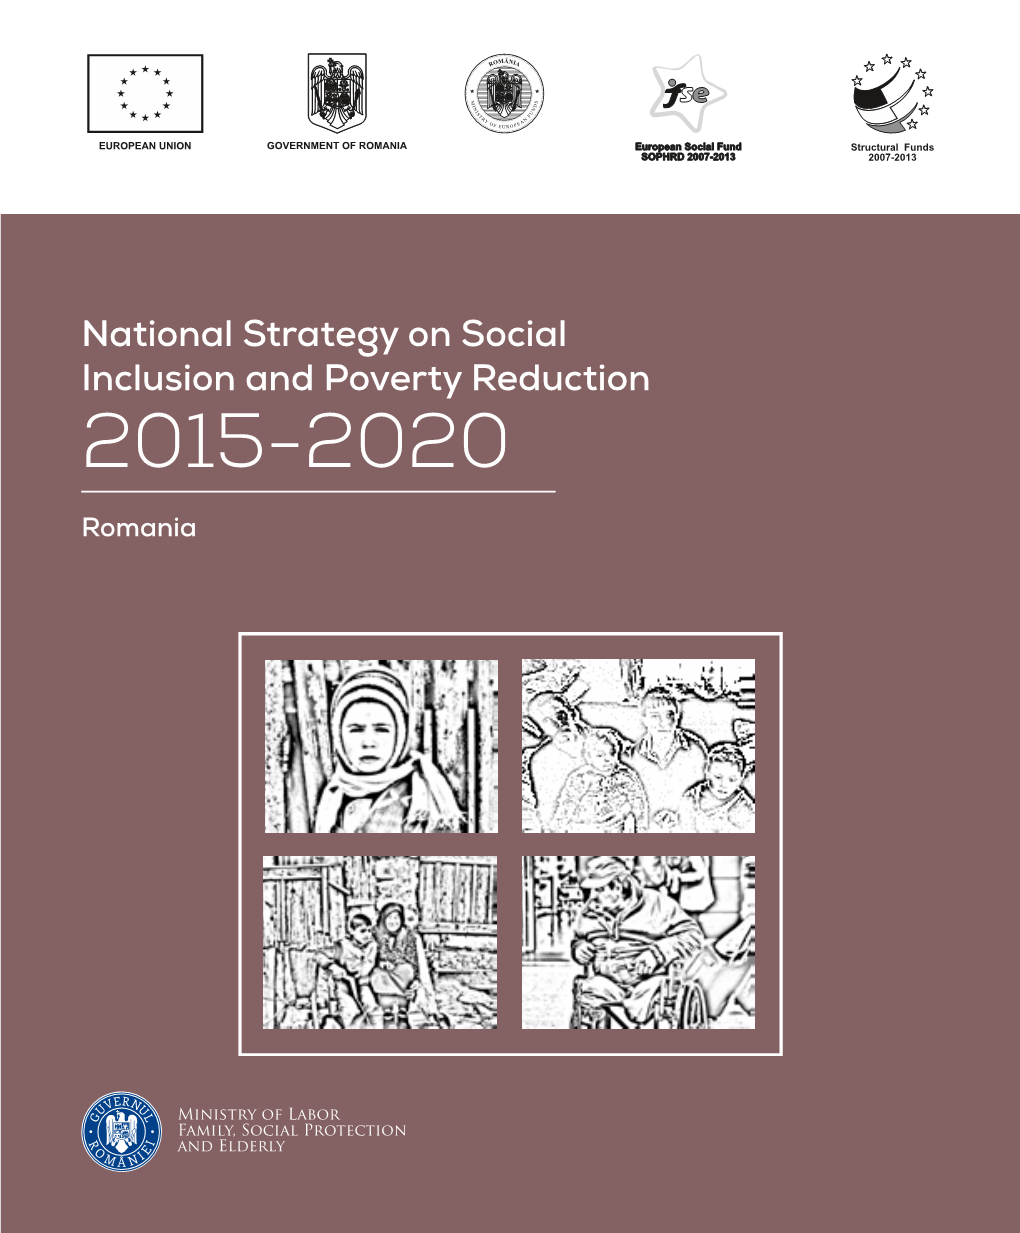 National Strategy on Social Inclusion and Poverty Reduction 2015-2020 Content